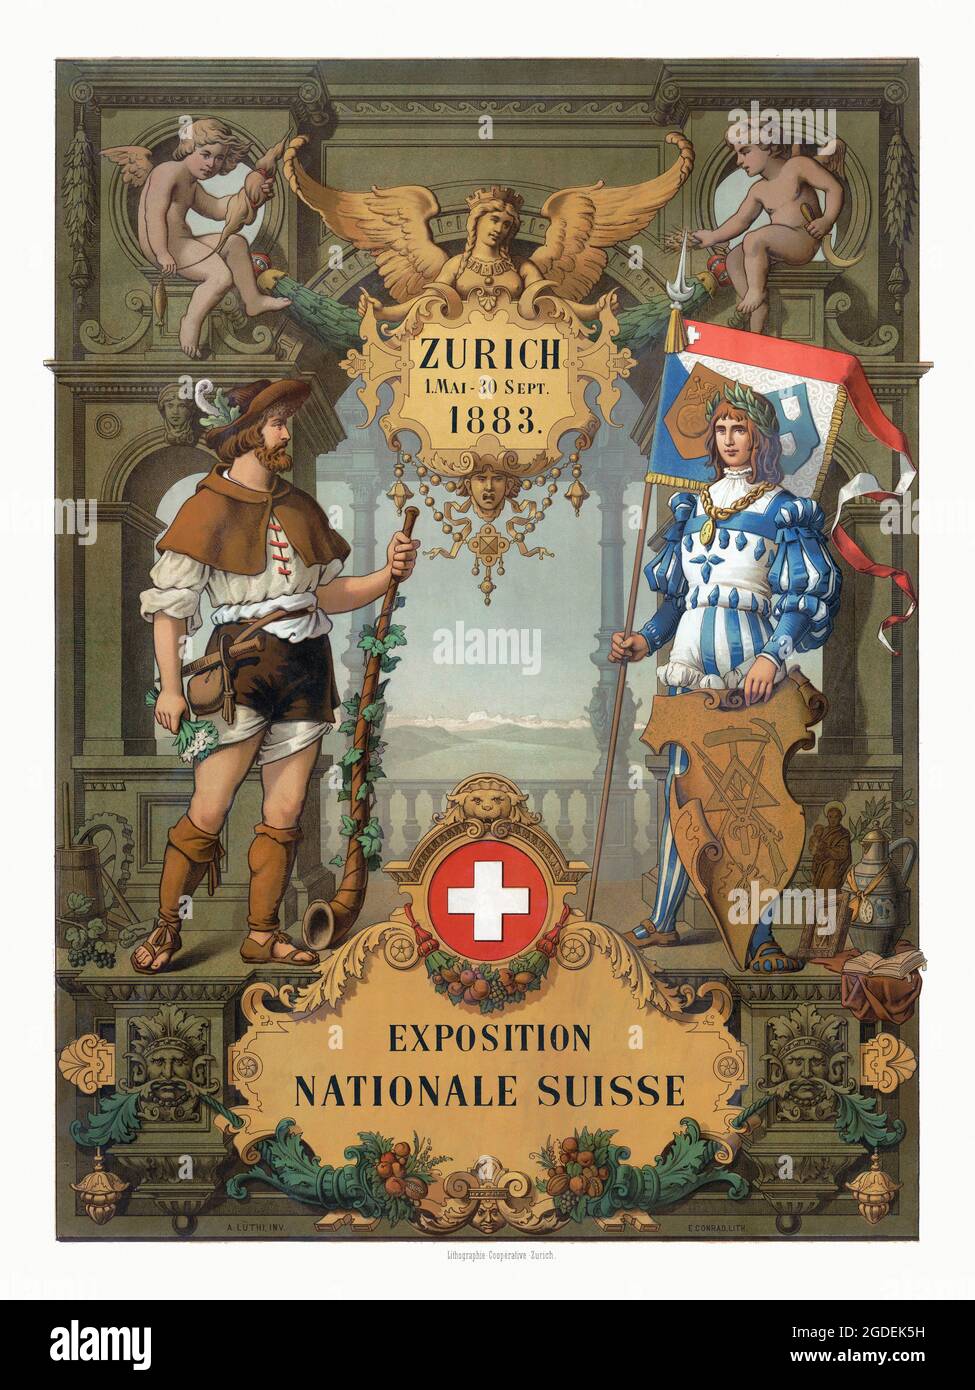 Zurich. Exposition Nationale Suisse by A Lüthi. Restored vintage poster published in 1883 in Switzerland. Stock Photo